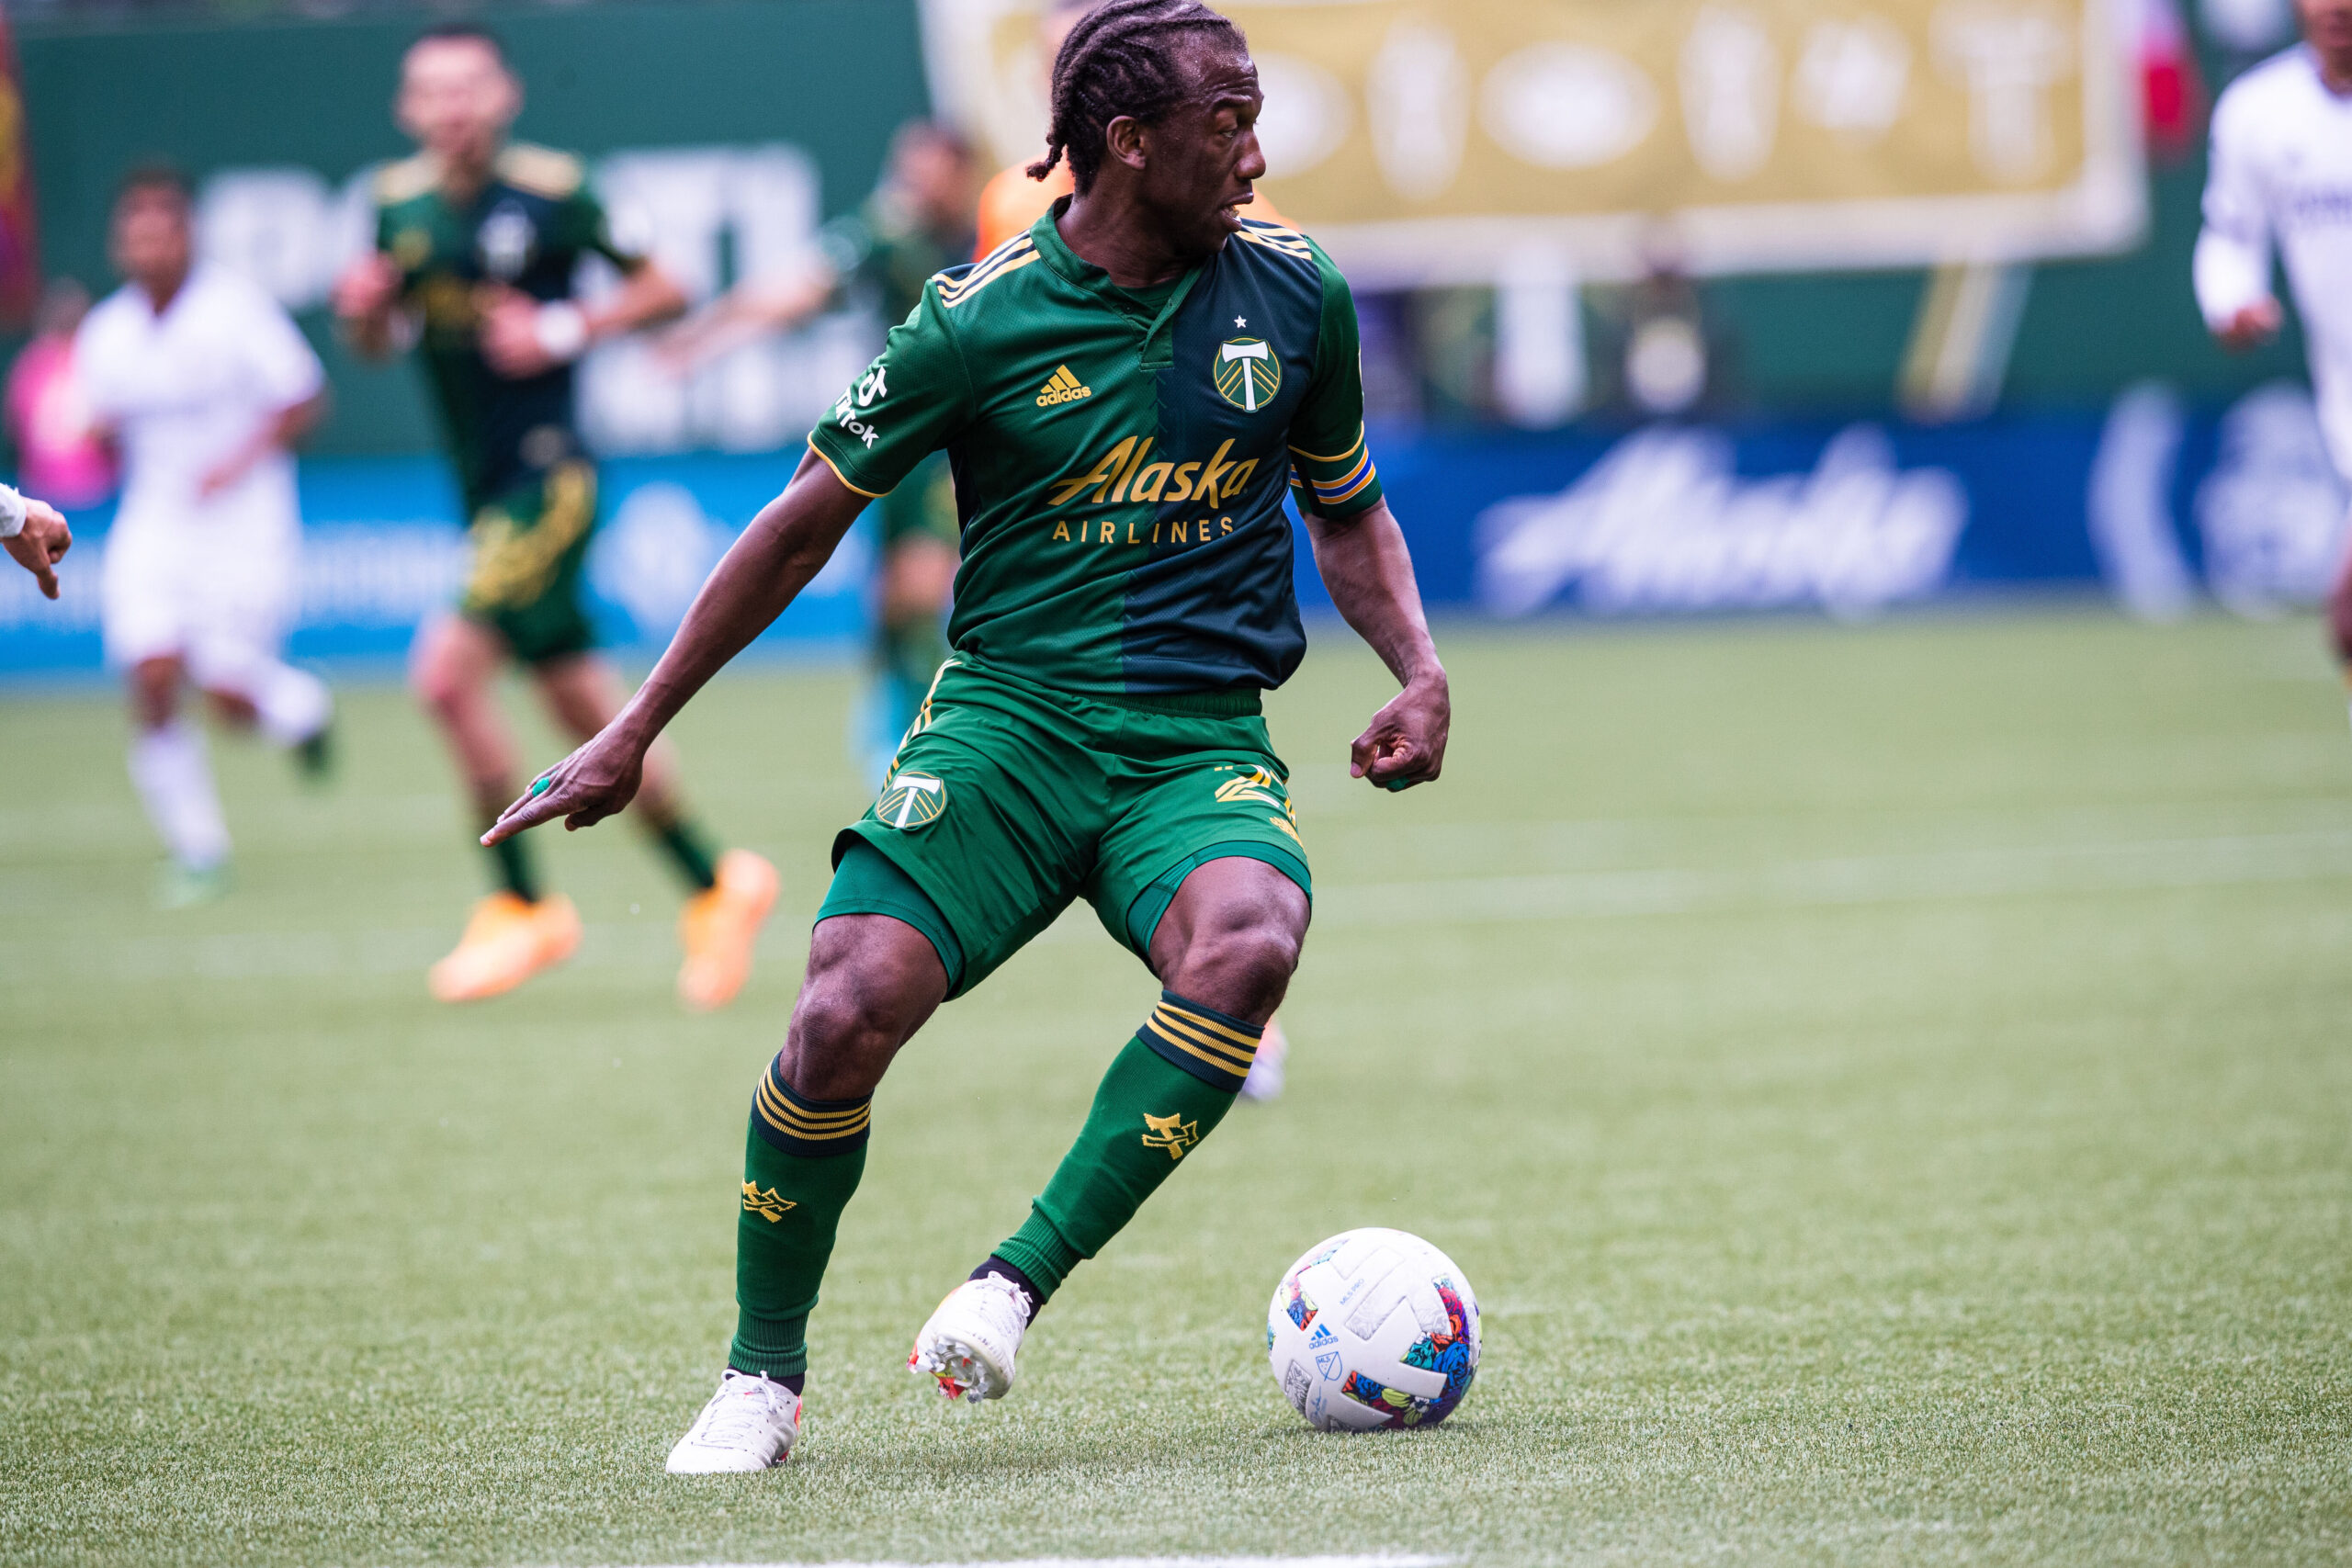 Inside PTFC  What to do about a Timbers defense that's so